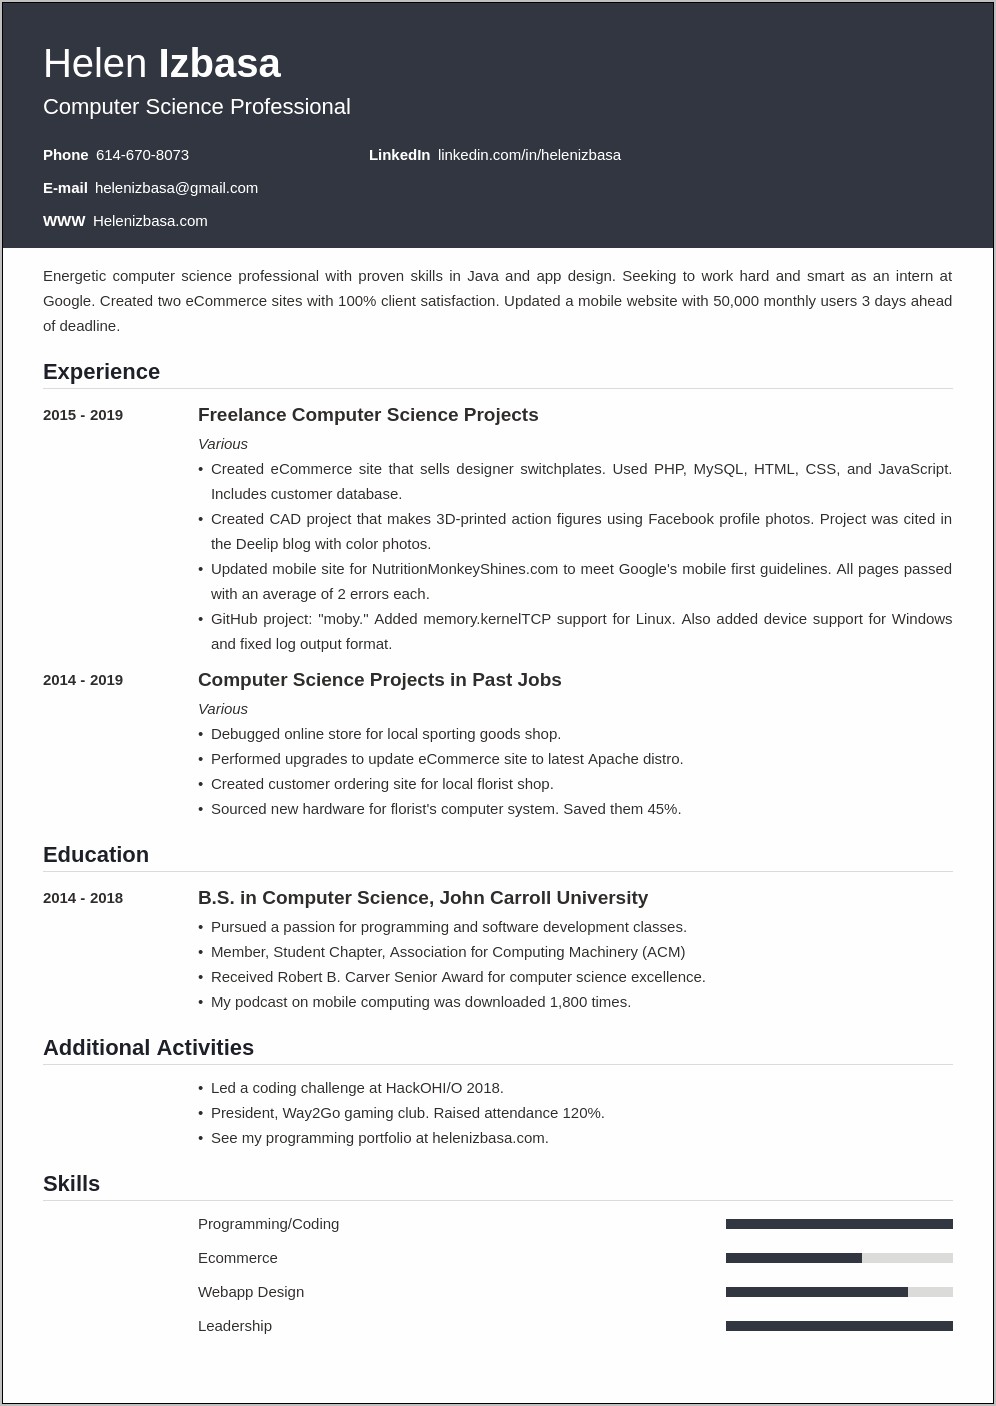 Sample Resume With Externship Experience